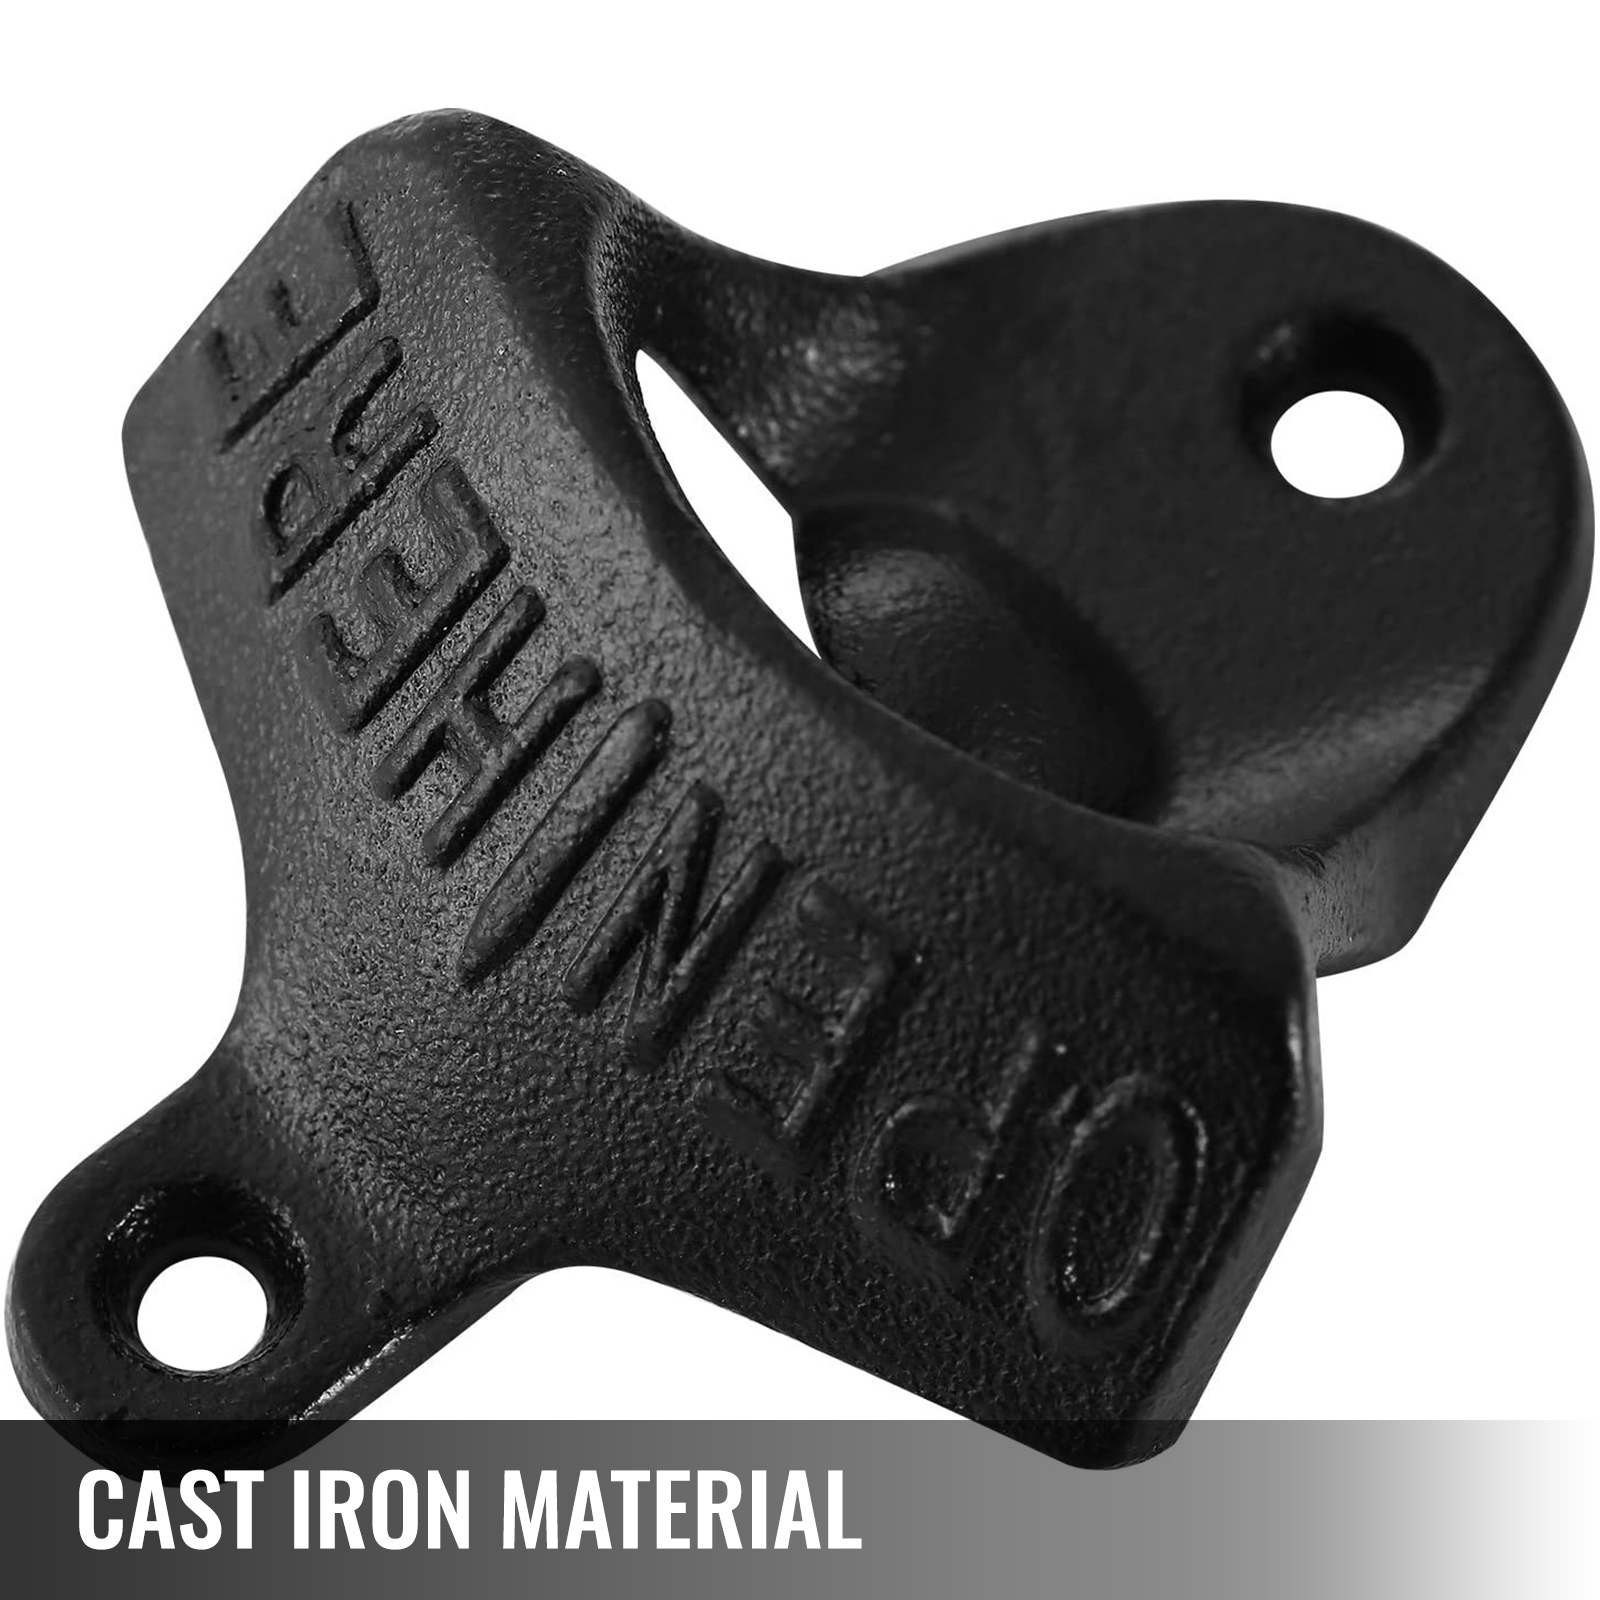 Pack of 2 JISTL Rustic Cast Iron OPEN HERE Bottle Opener Vintage Style Wall Mount MAN CAVE 